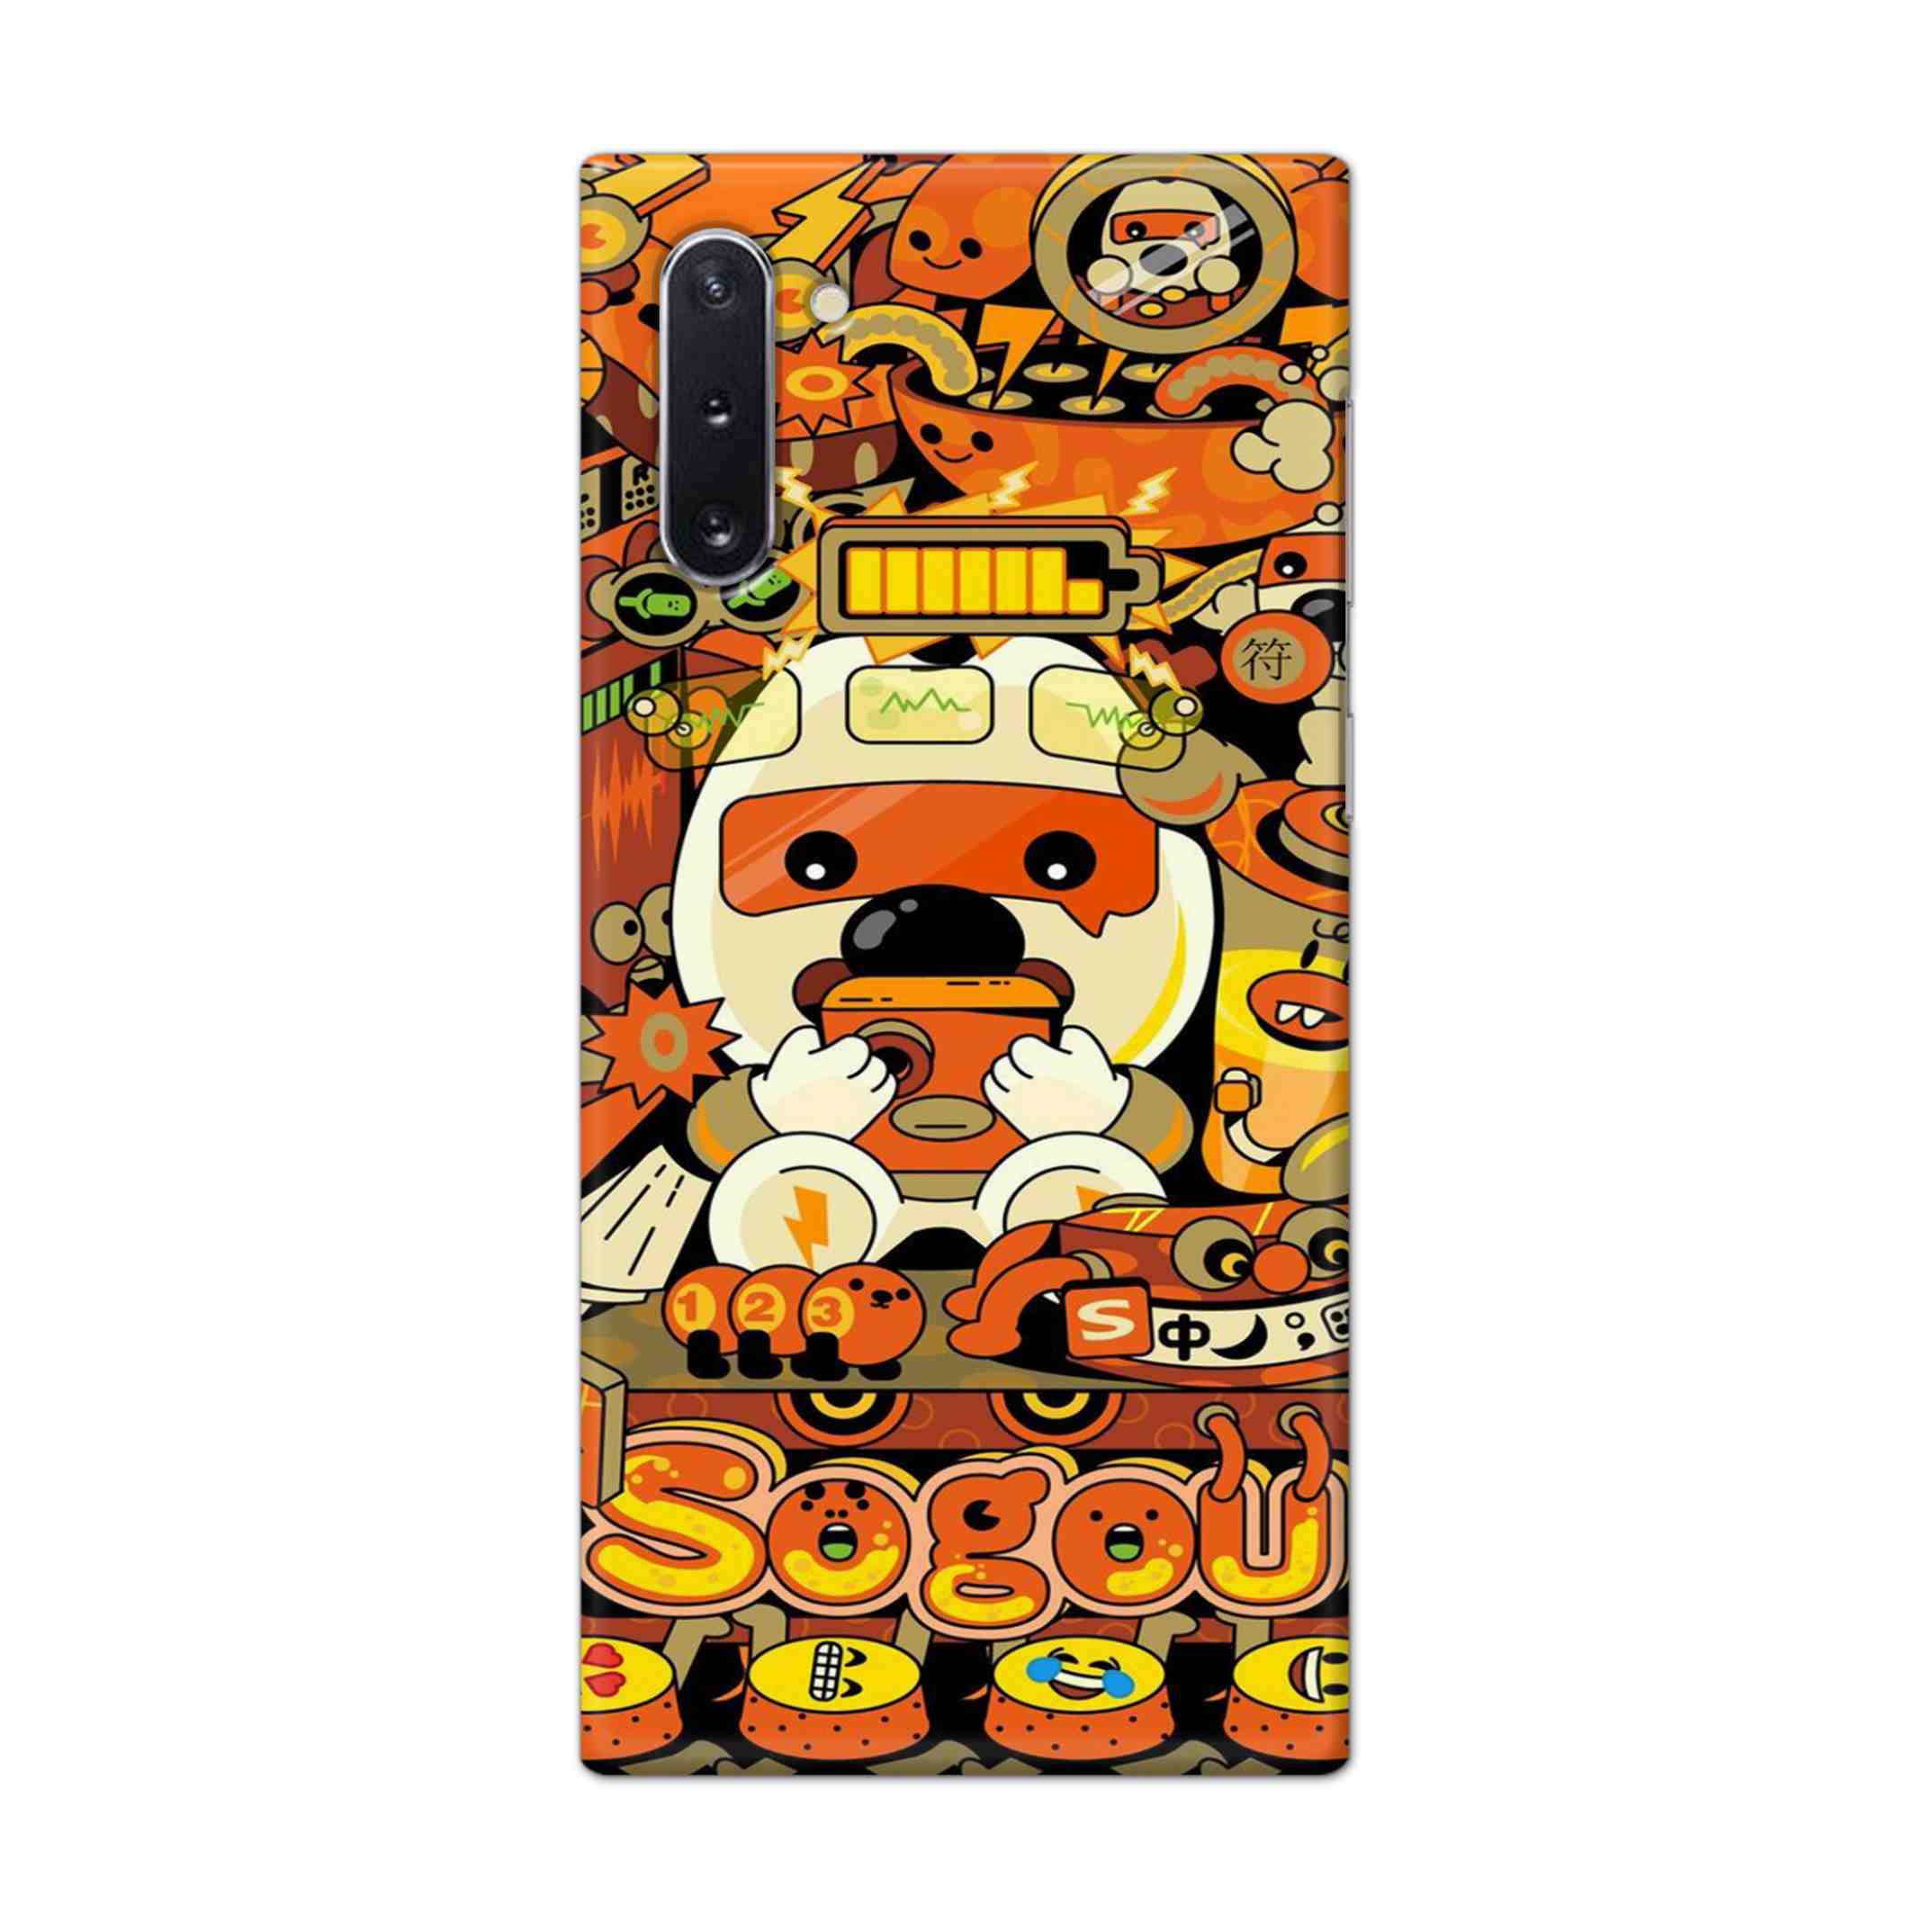 Buy Sogou Hard Back Mobile Phone Case Cover For Samsung Galaxy Note 10 Online